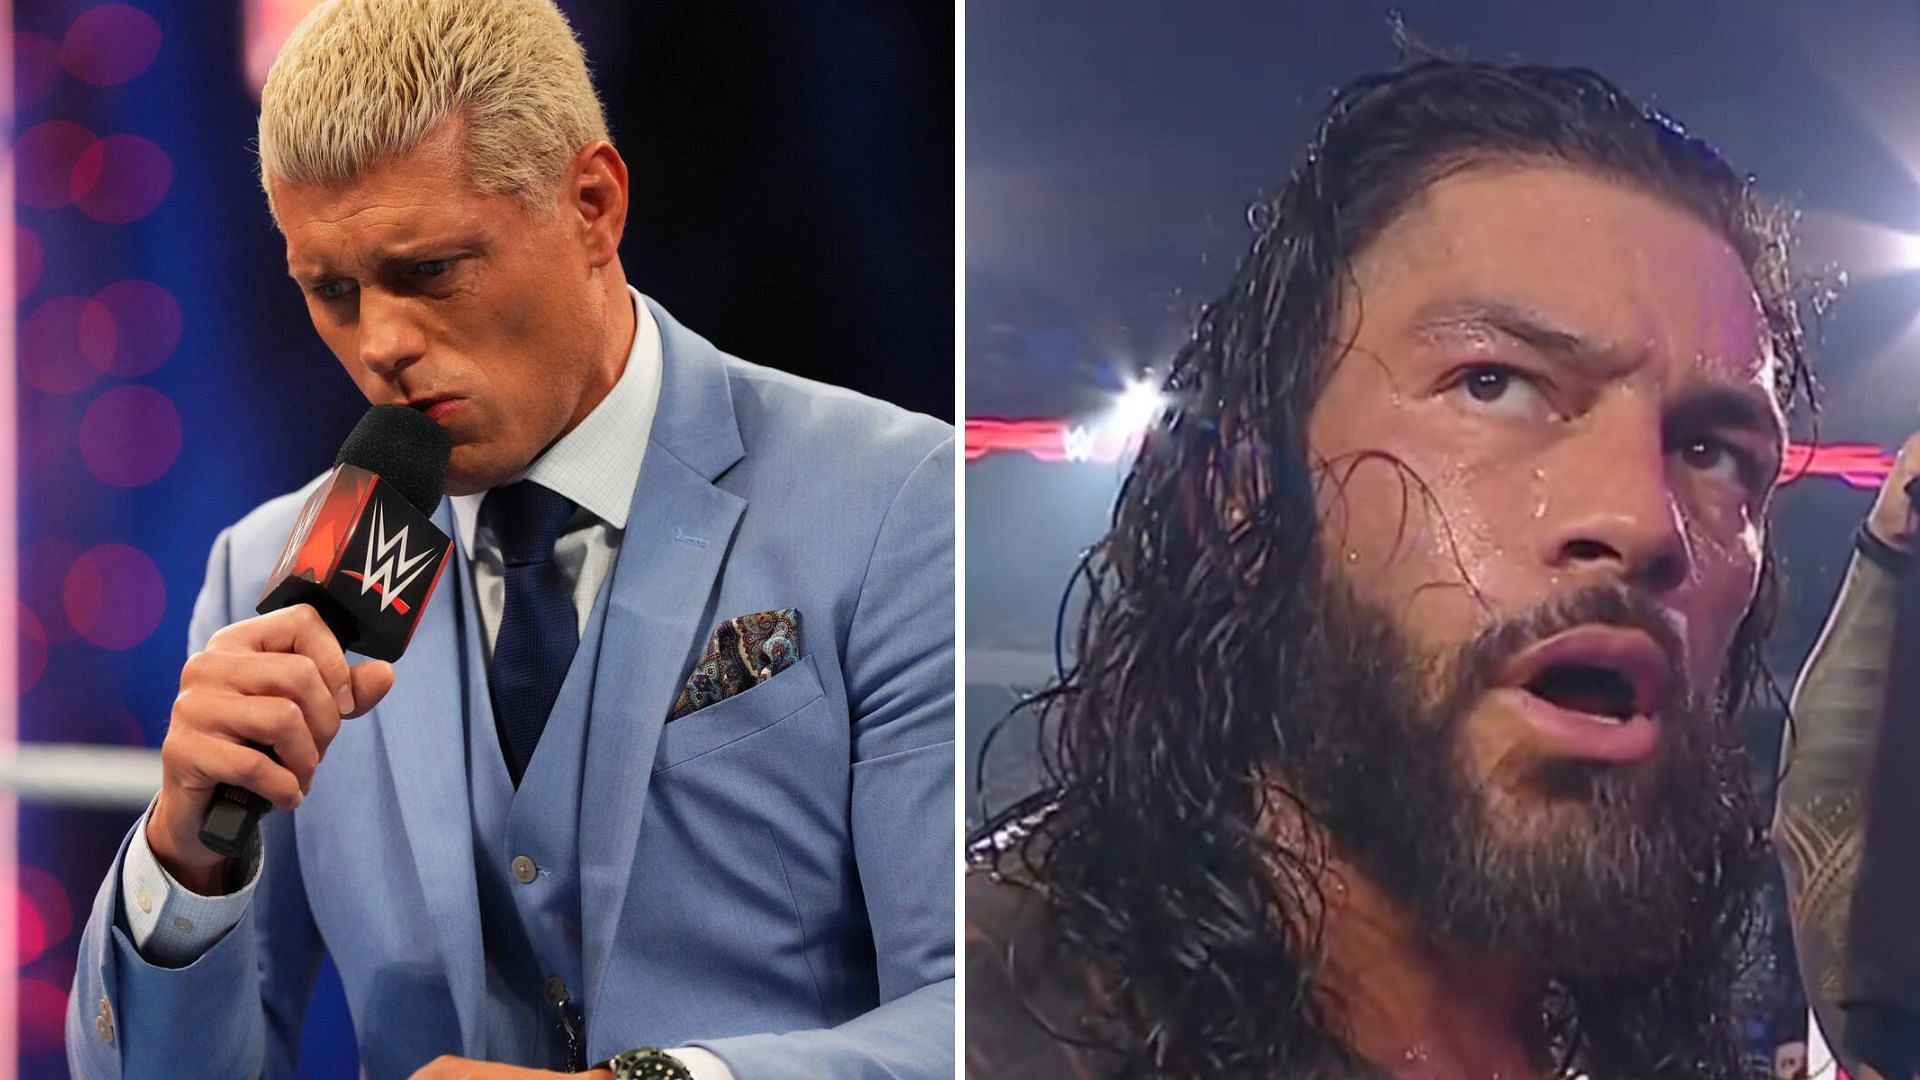 Cody Rhodes and Roman Reigns will have a WrestleMania showdown